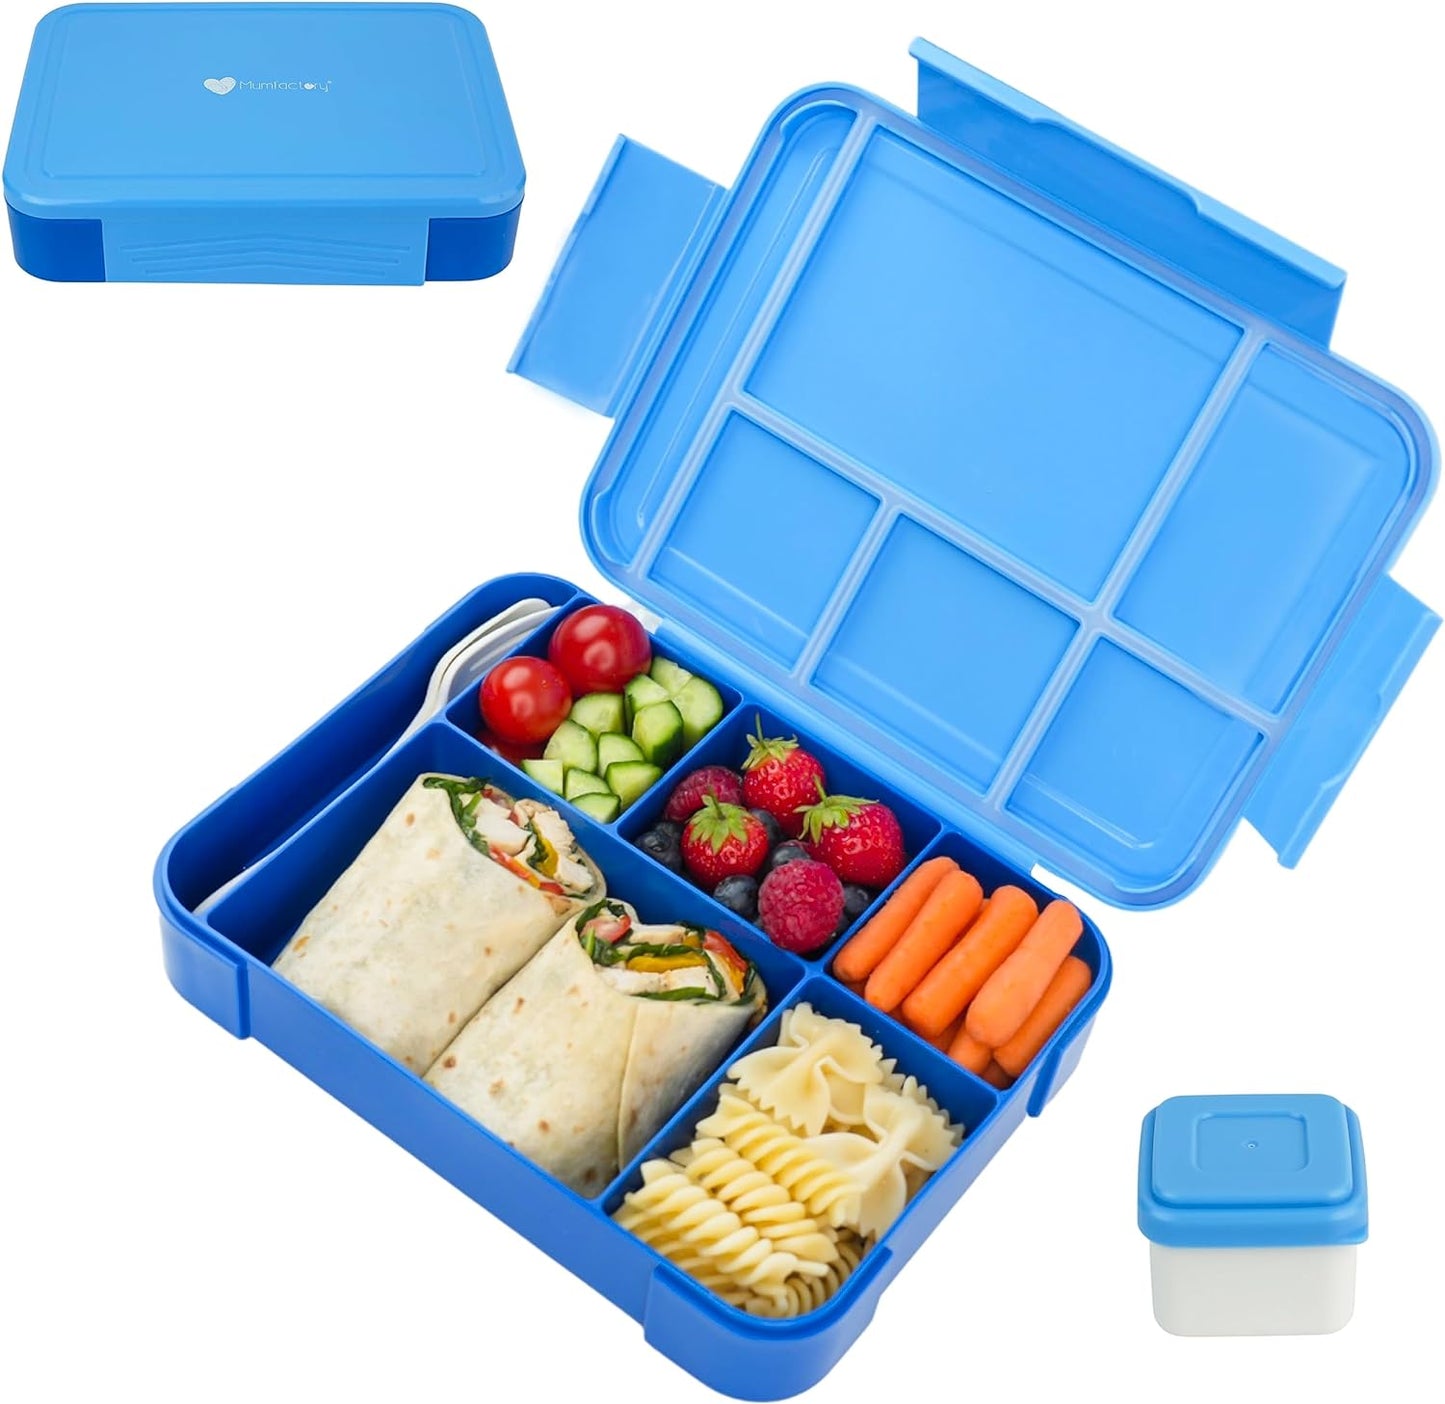 Lunch Box for Kids - 5 Compartments